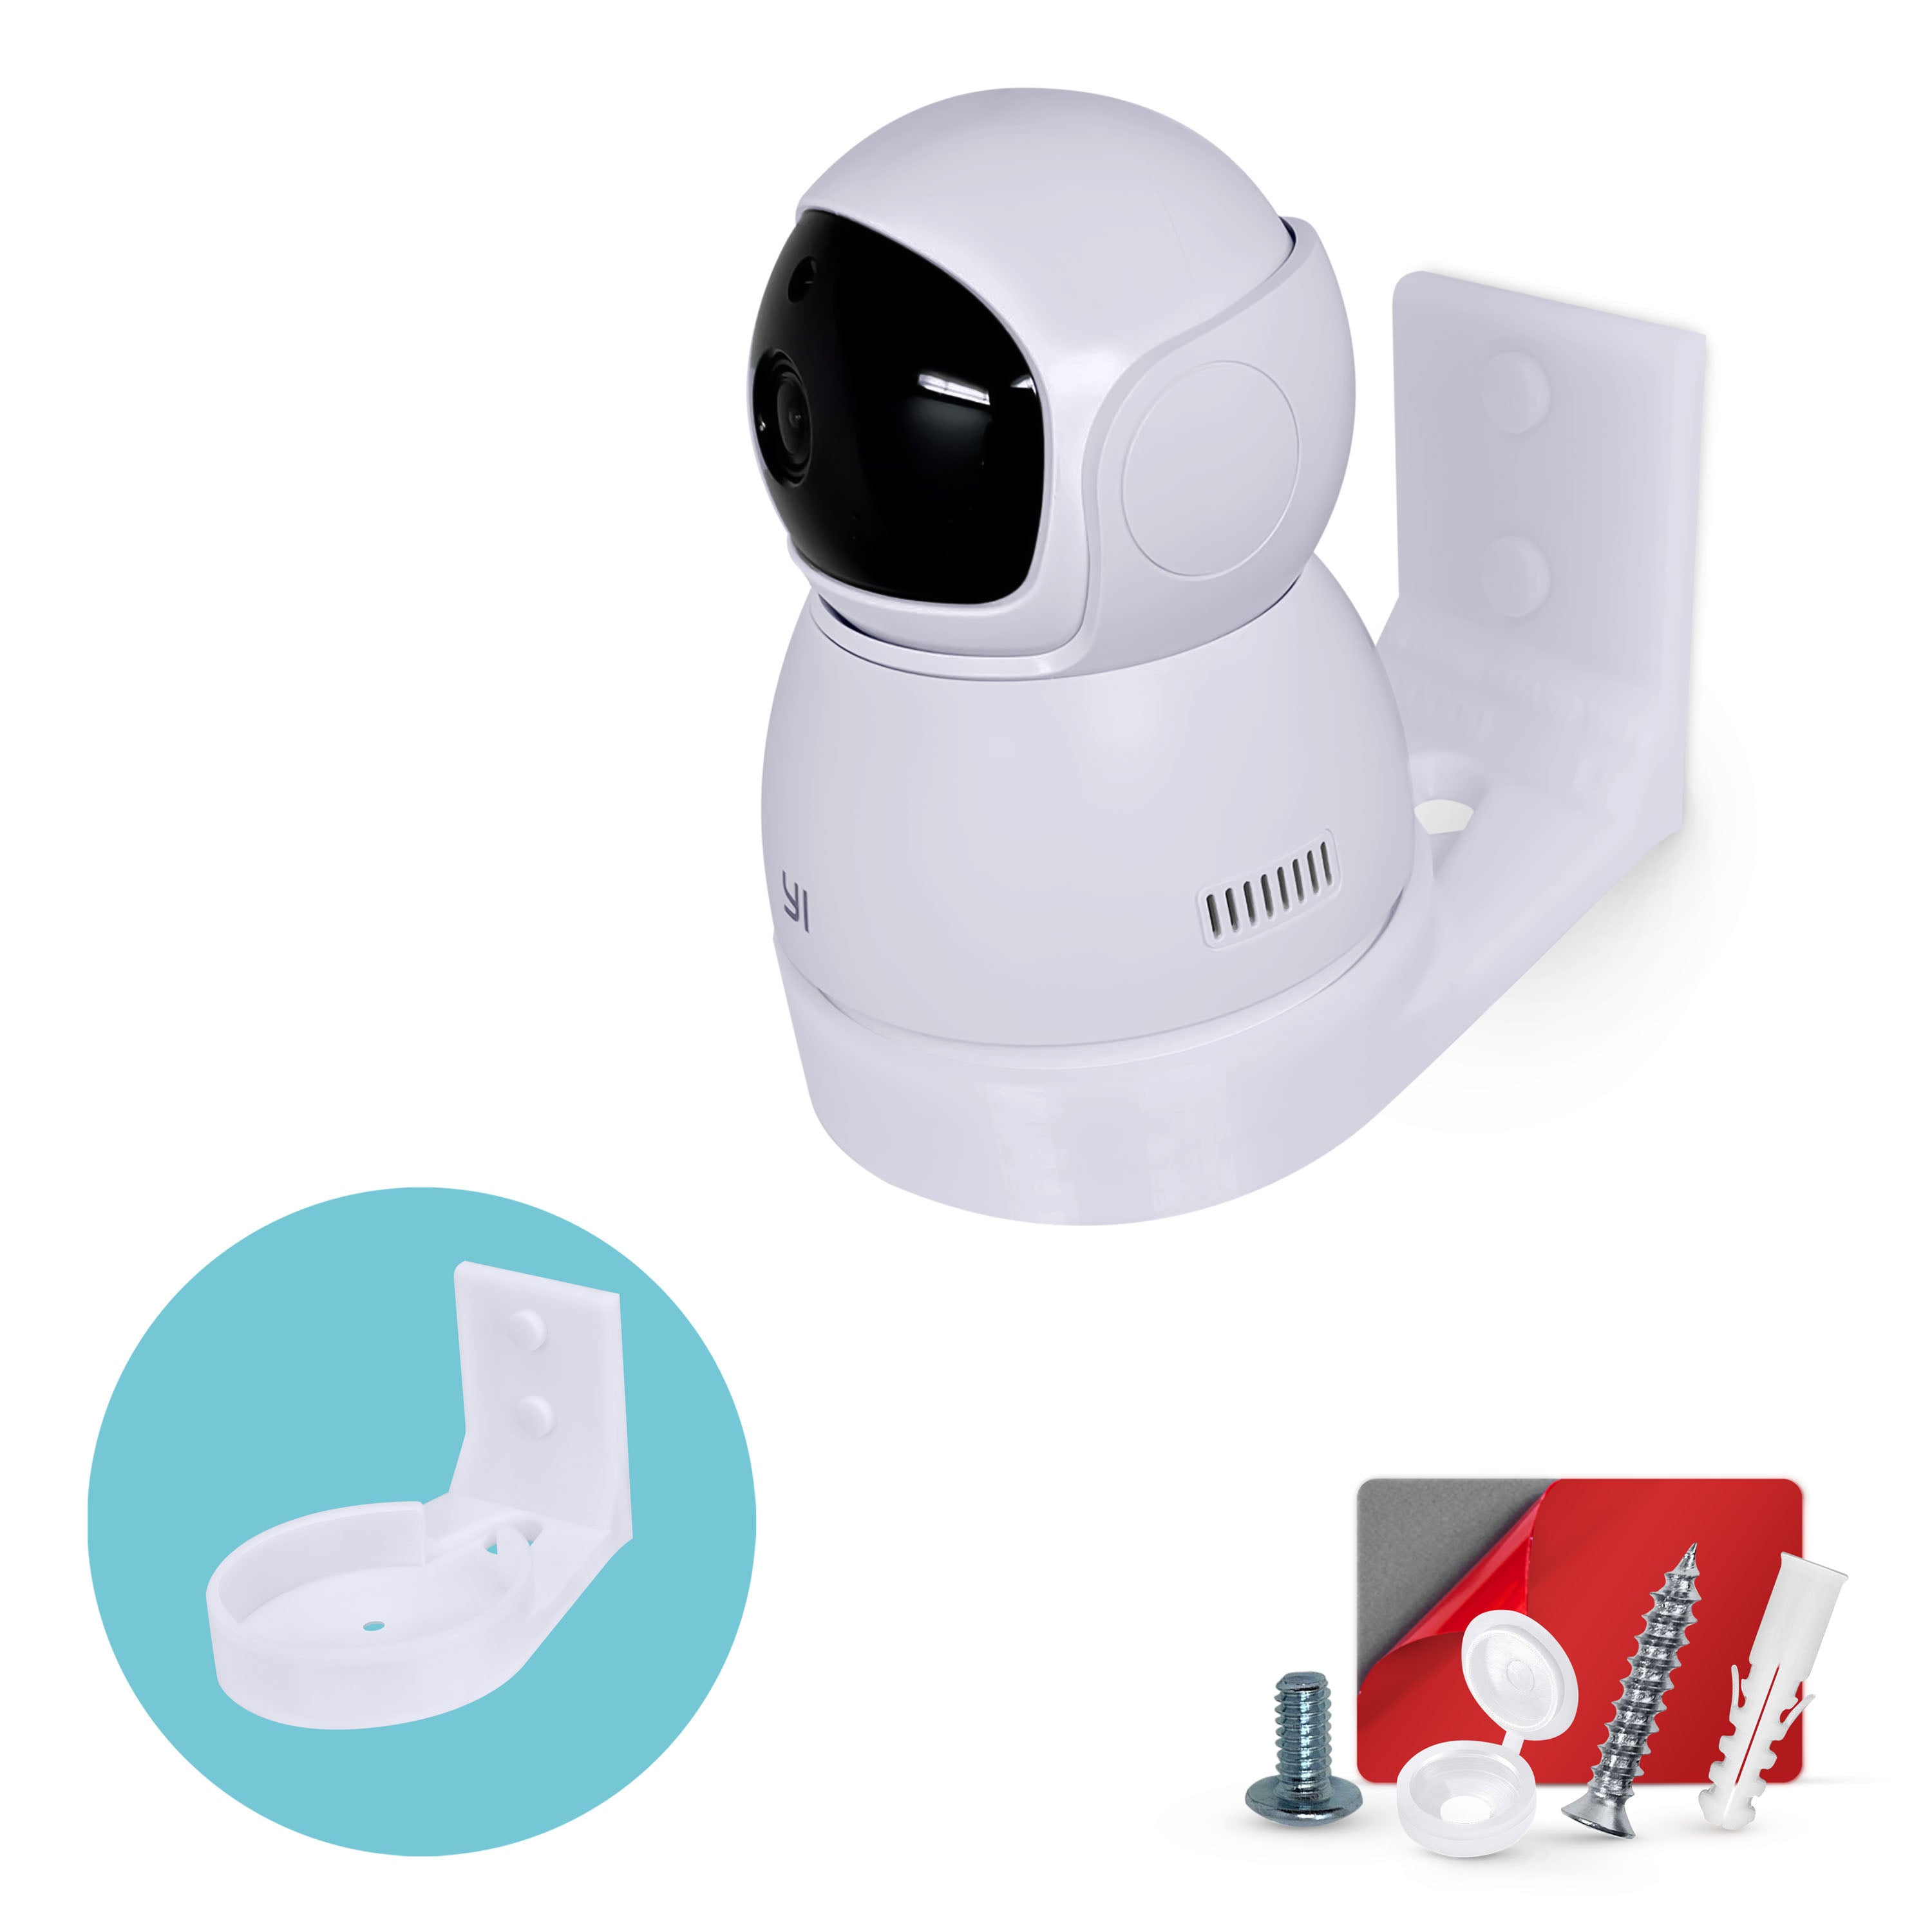 Wall Mount for YI Dome Guard (R30) Pet & Baby Indoor Camera